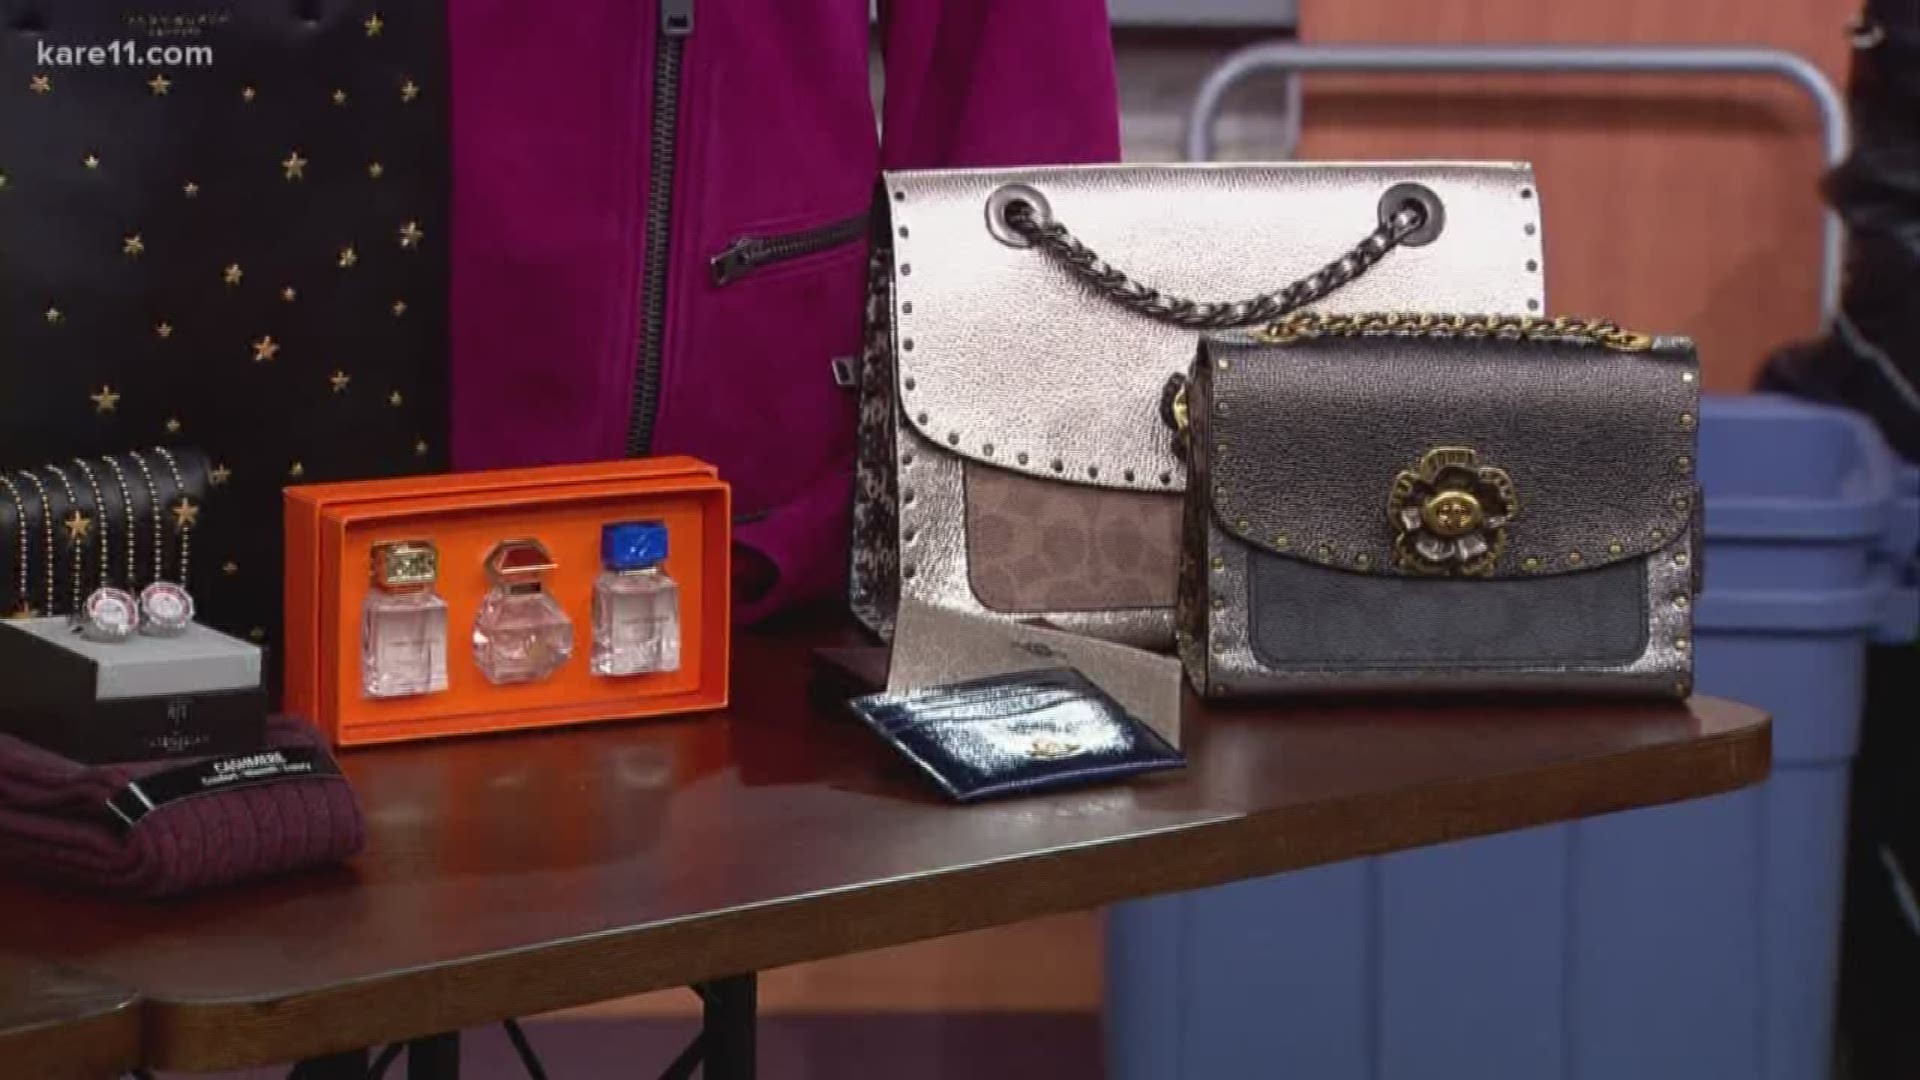 Rachel Oelke from Edina's Galleria offers a show and tell for little and big luxury gift ideas.